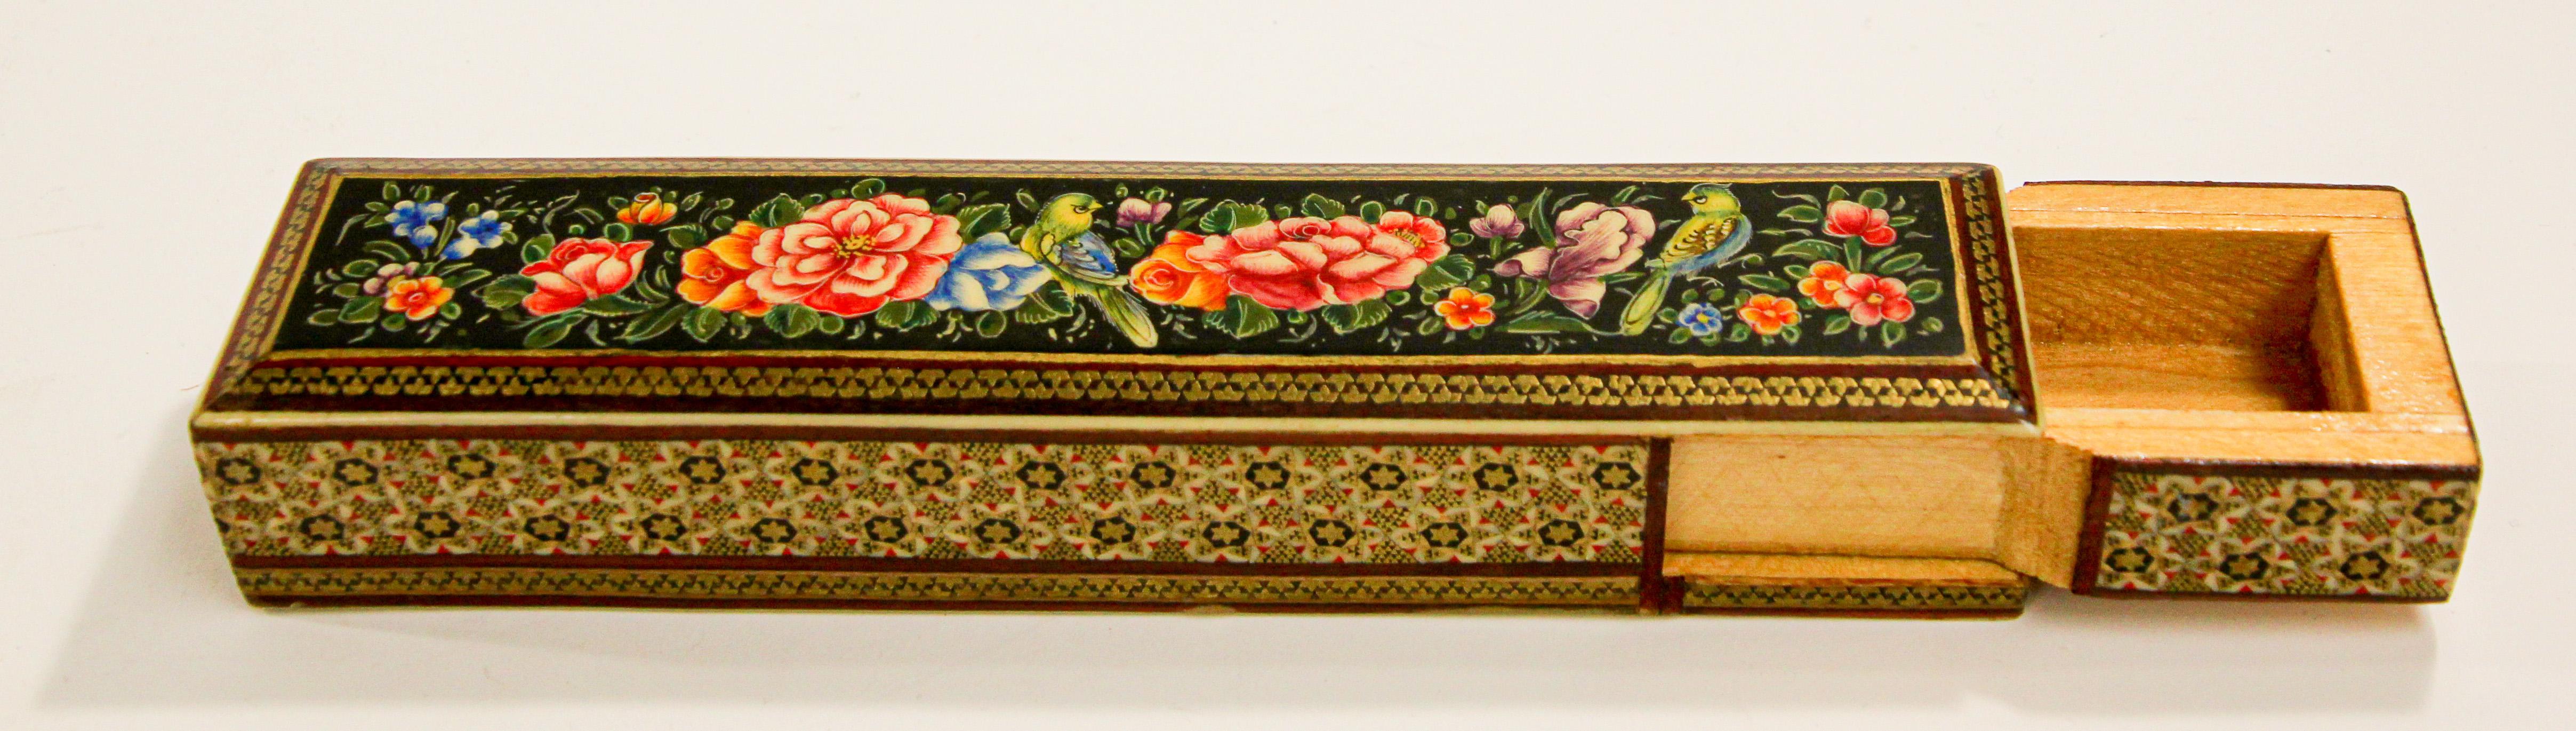 Indian Persian Lacquer Pen Box Hand Painted with Floral Design